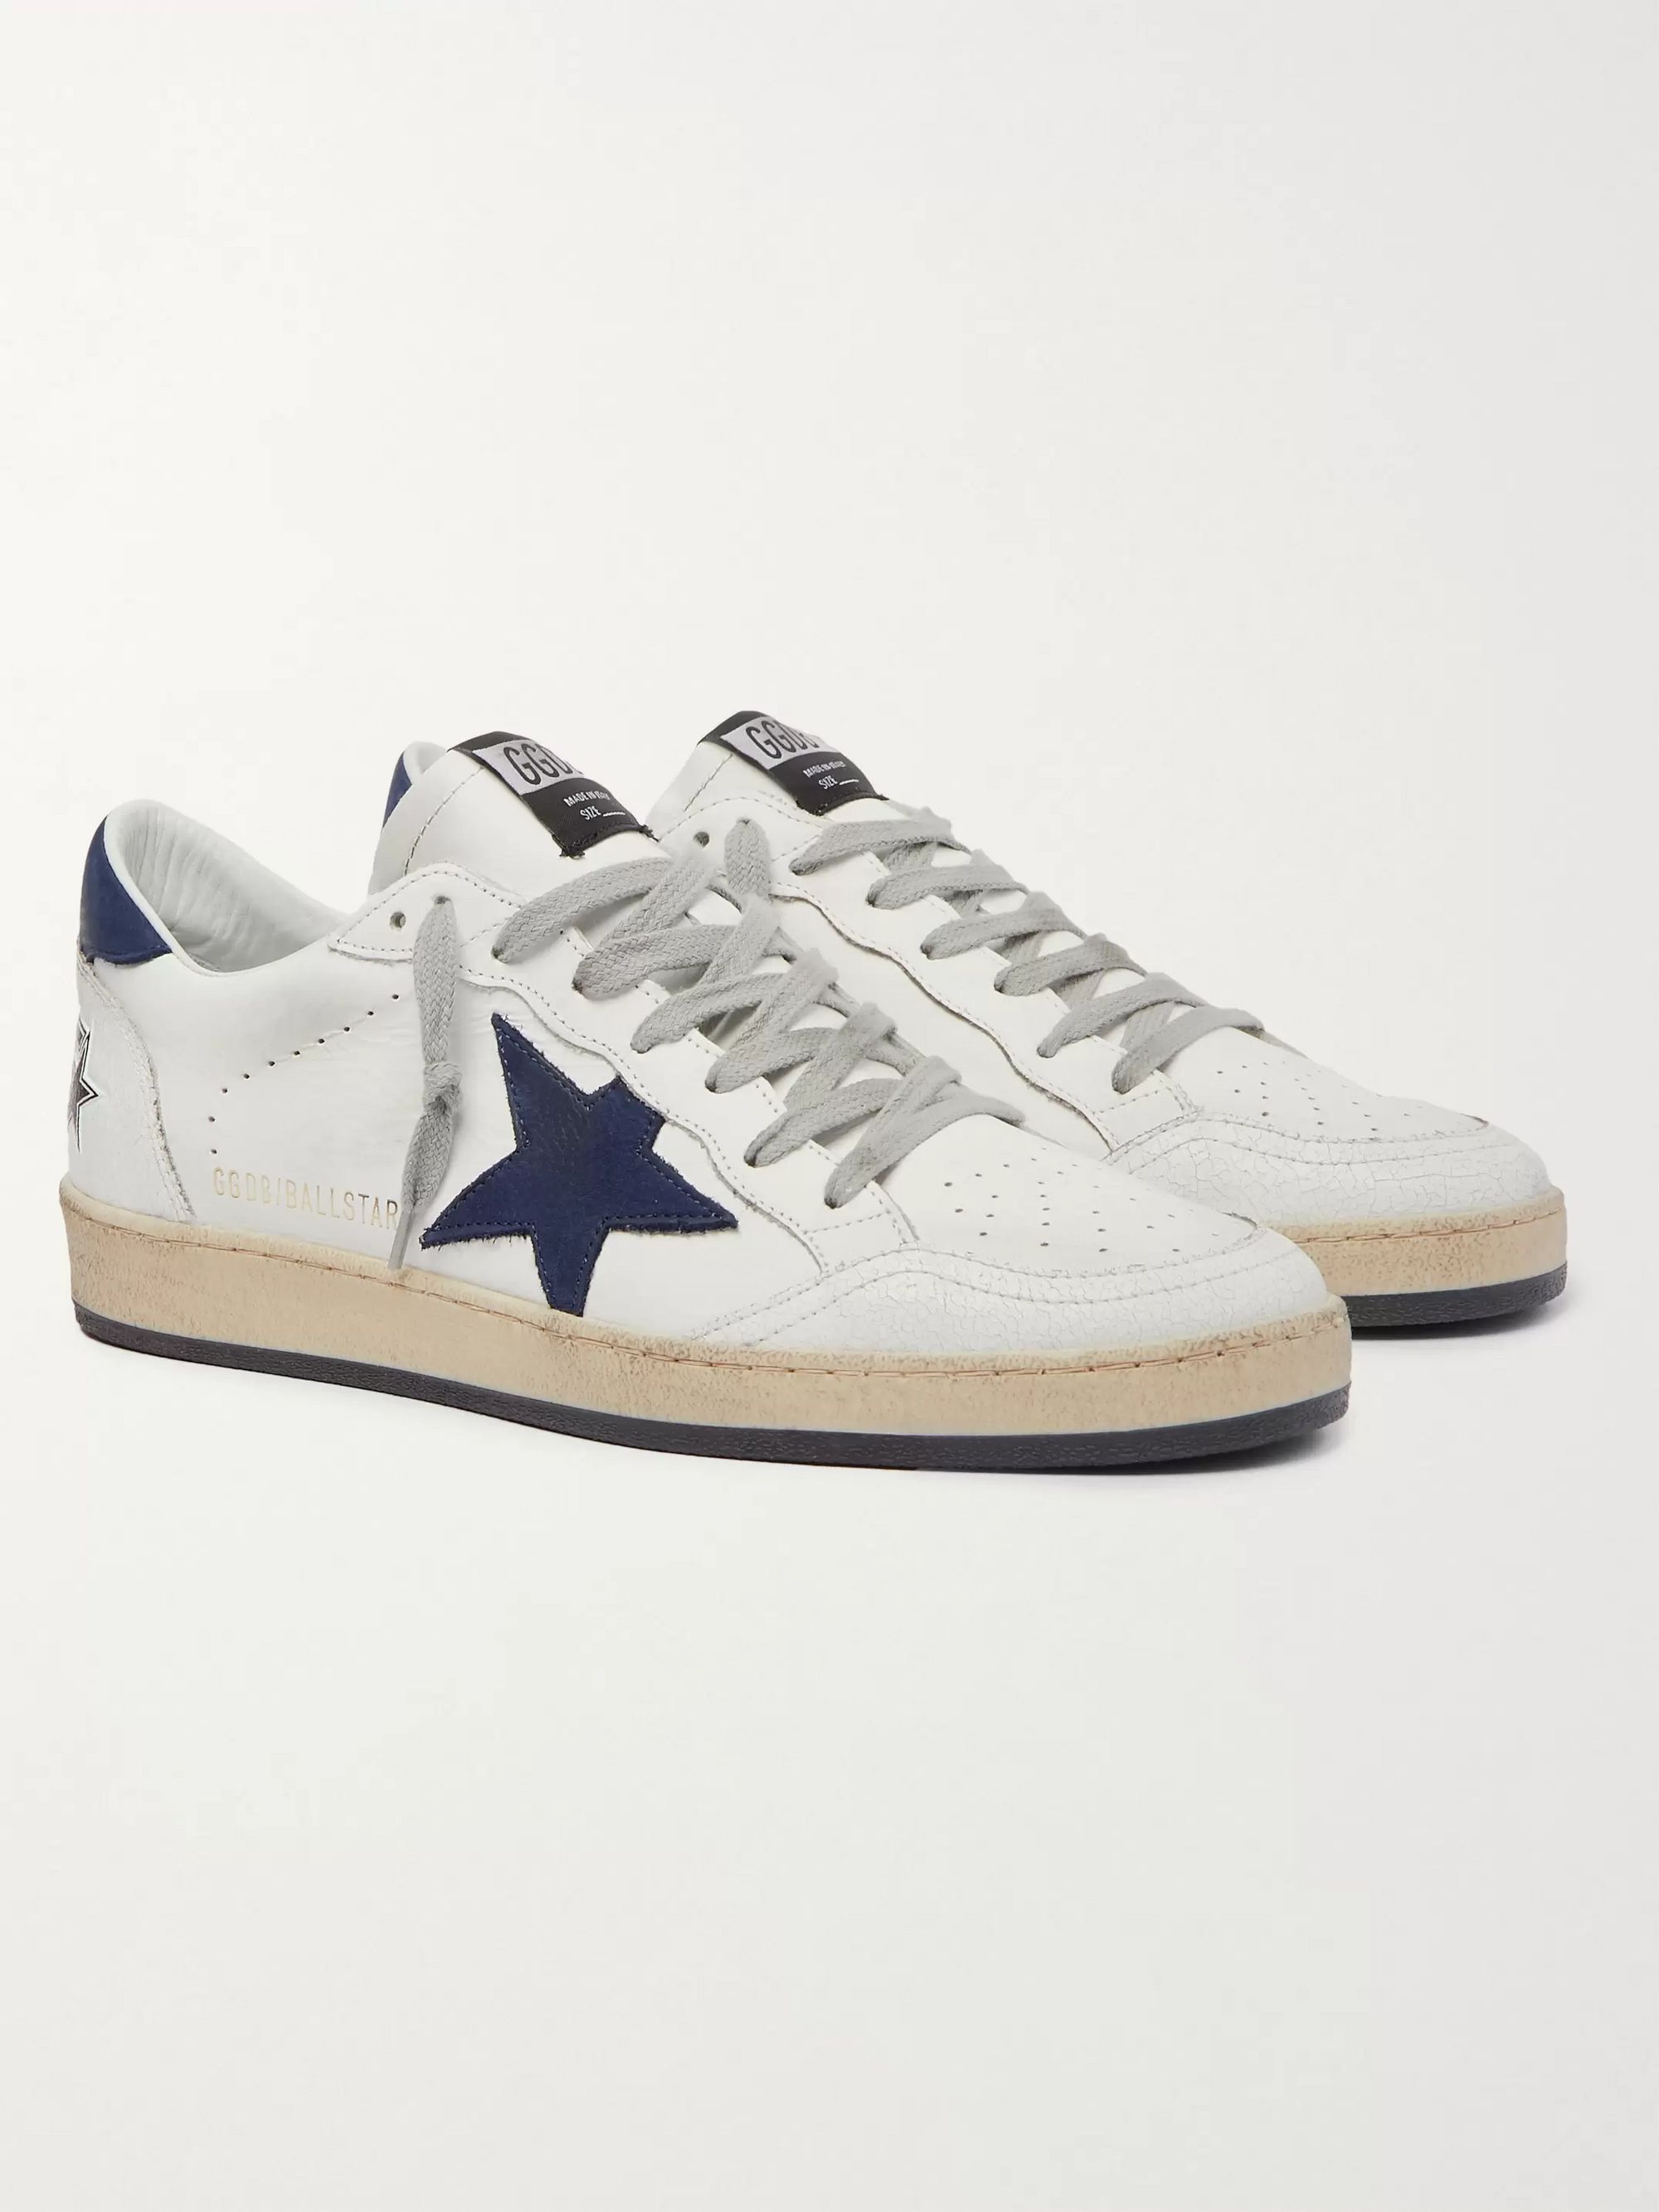 White Ball Star Distressed Leather 